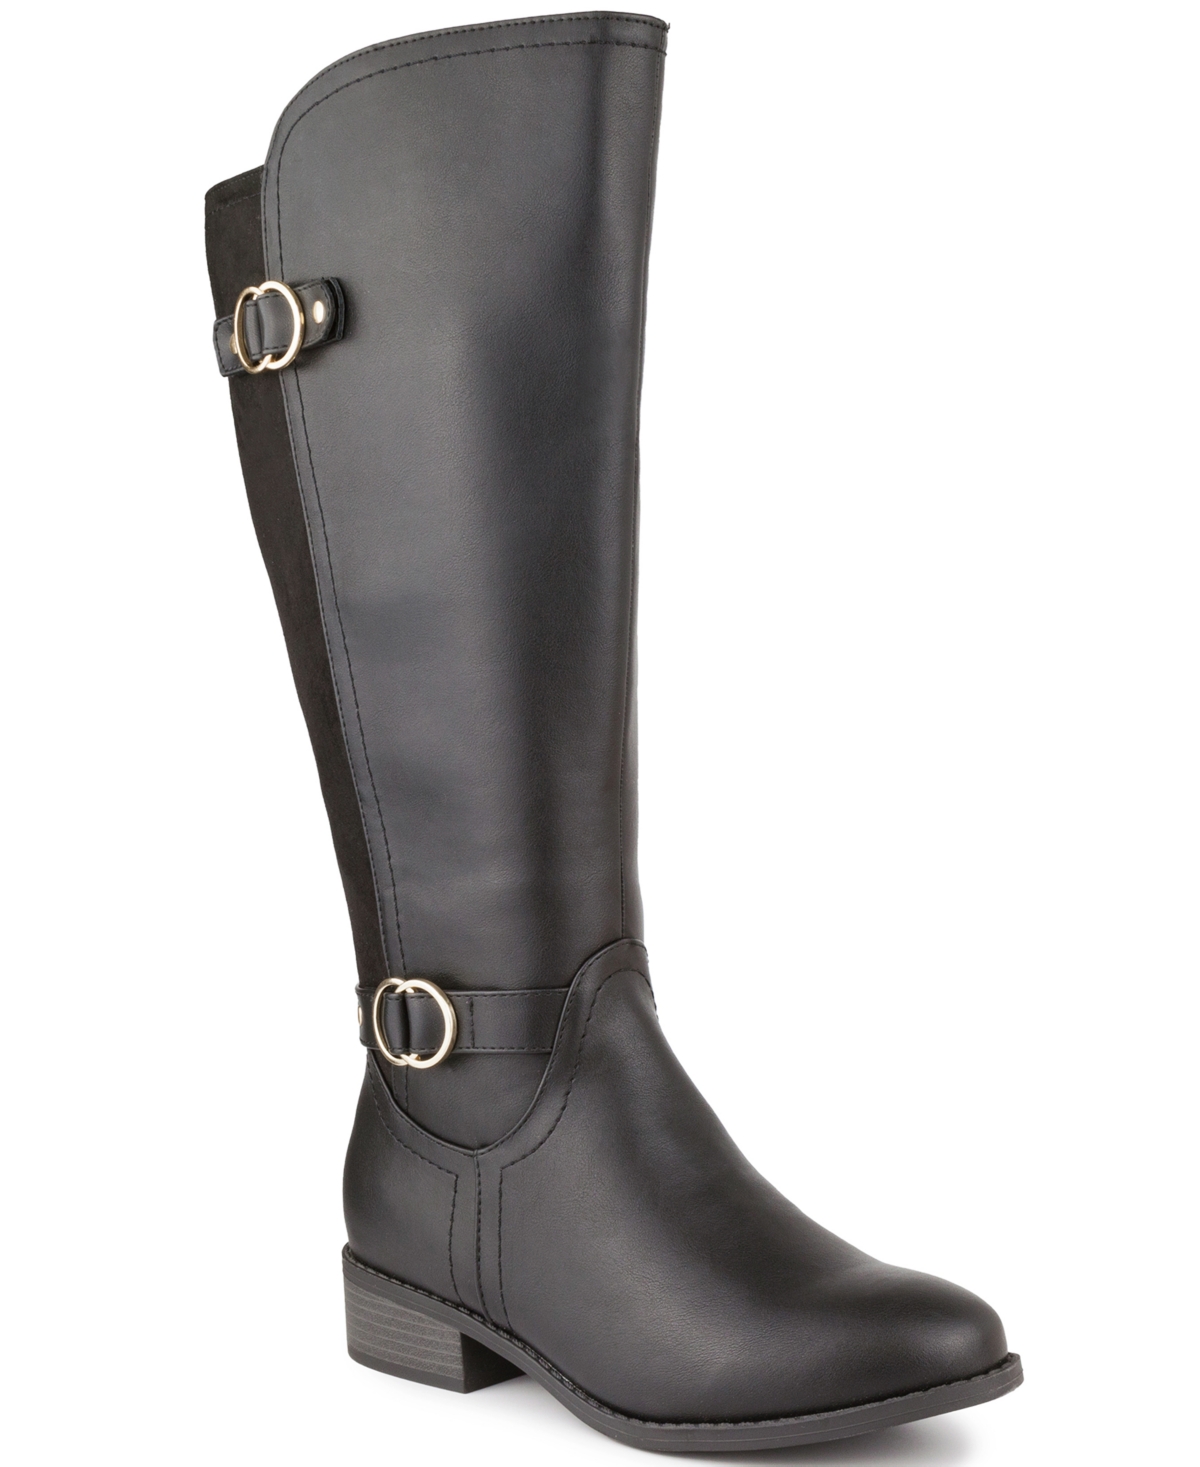 Leandraa Wide-Calf Riding Boots, Created for Macy's - Black